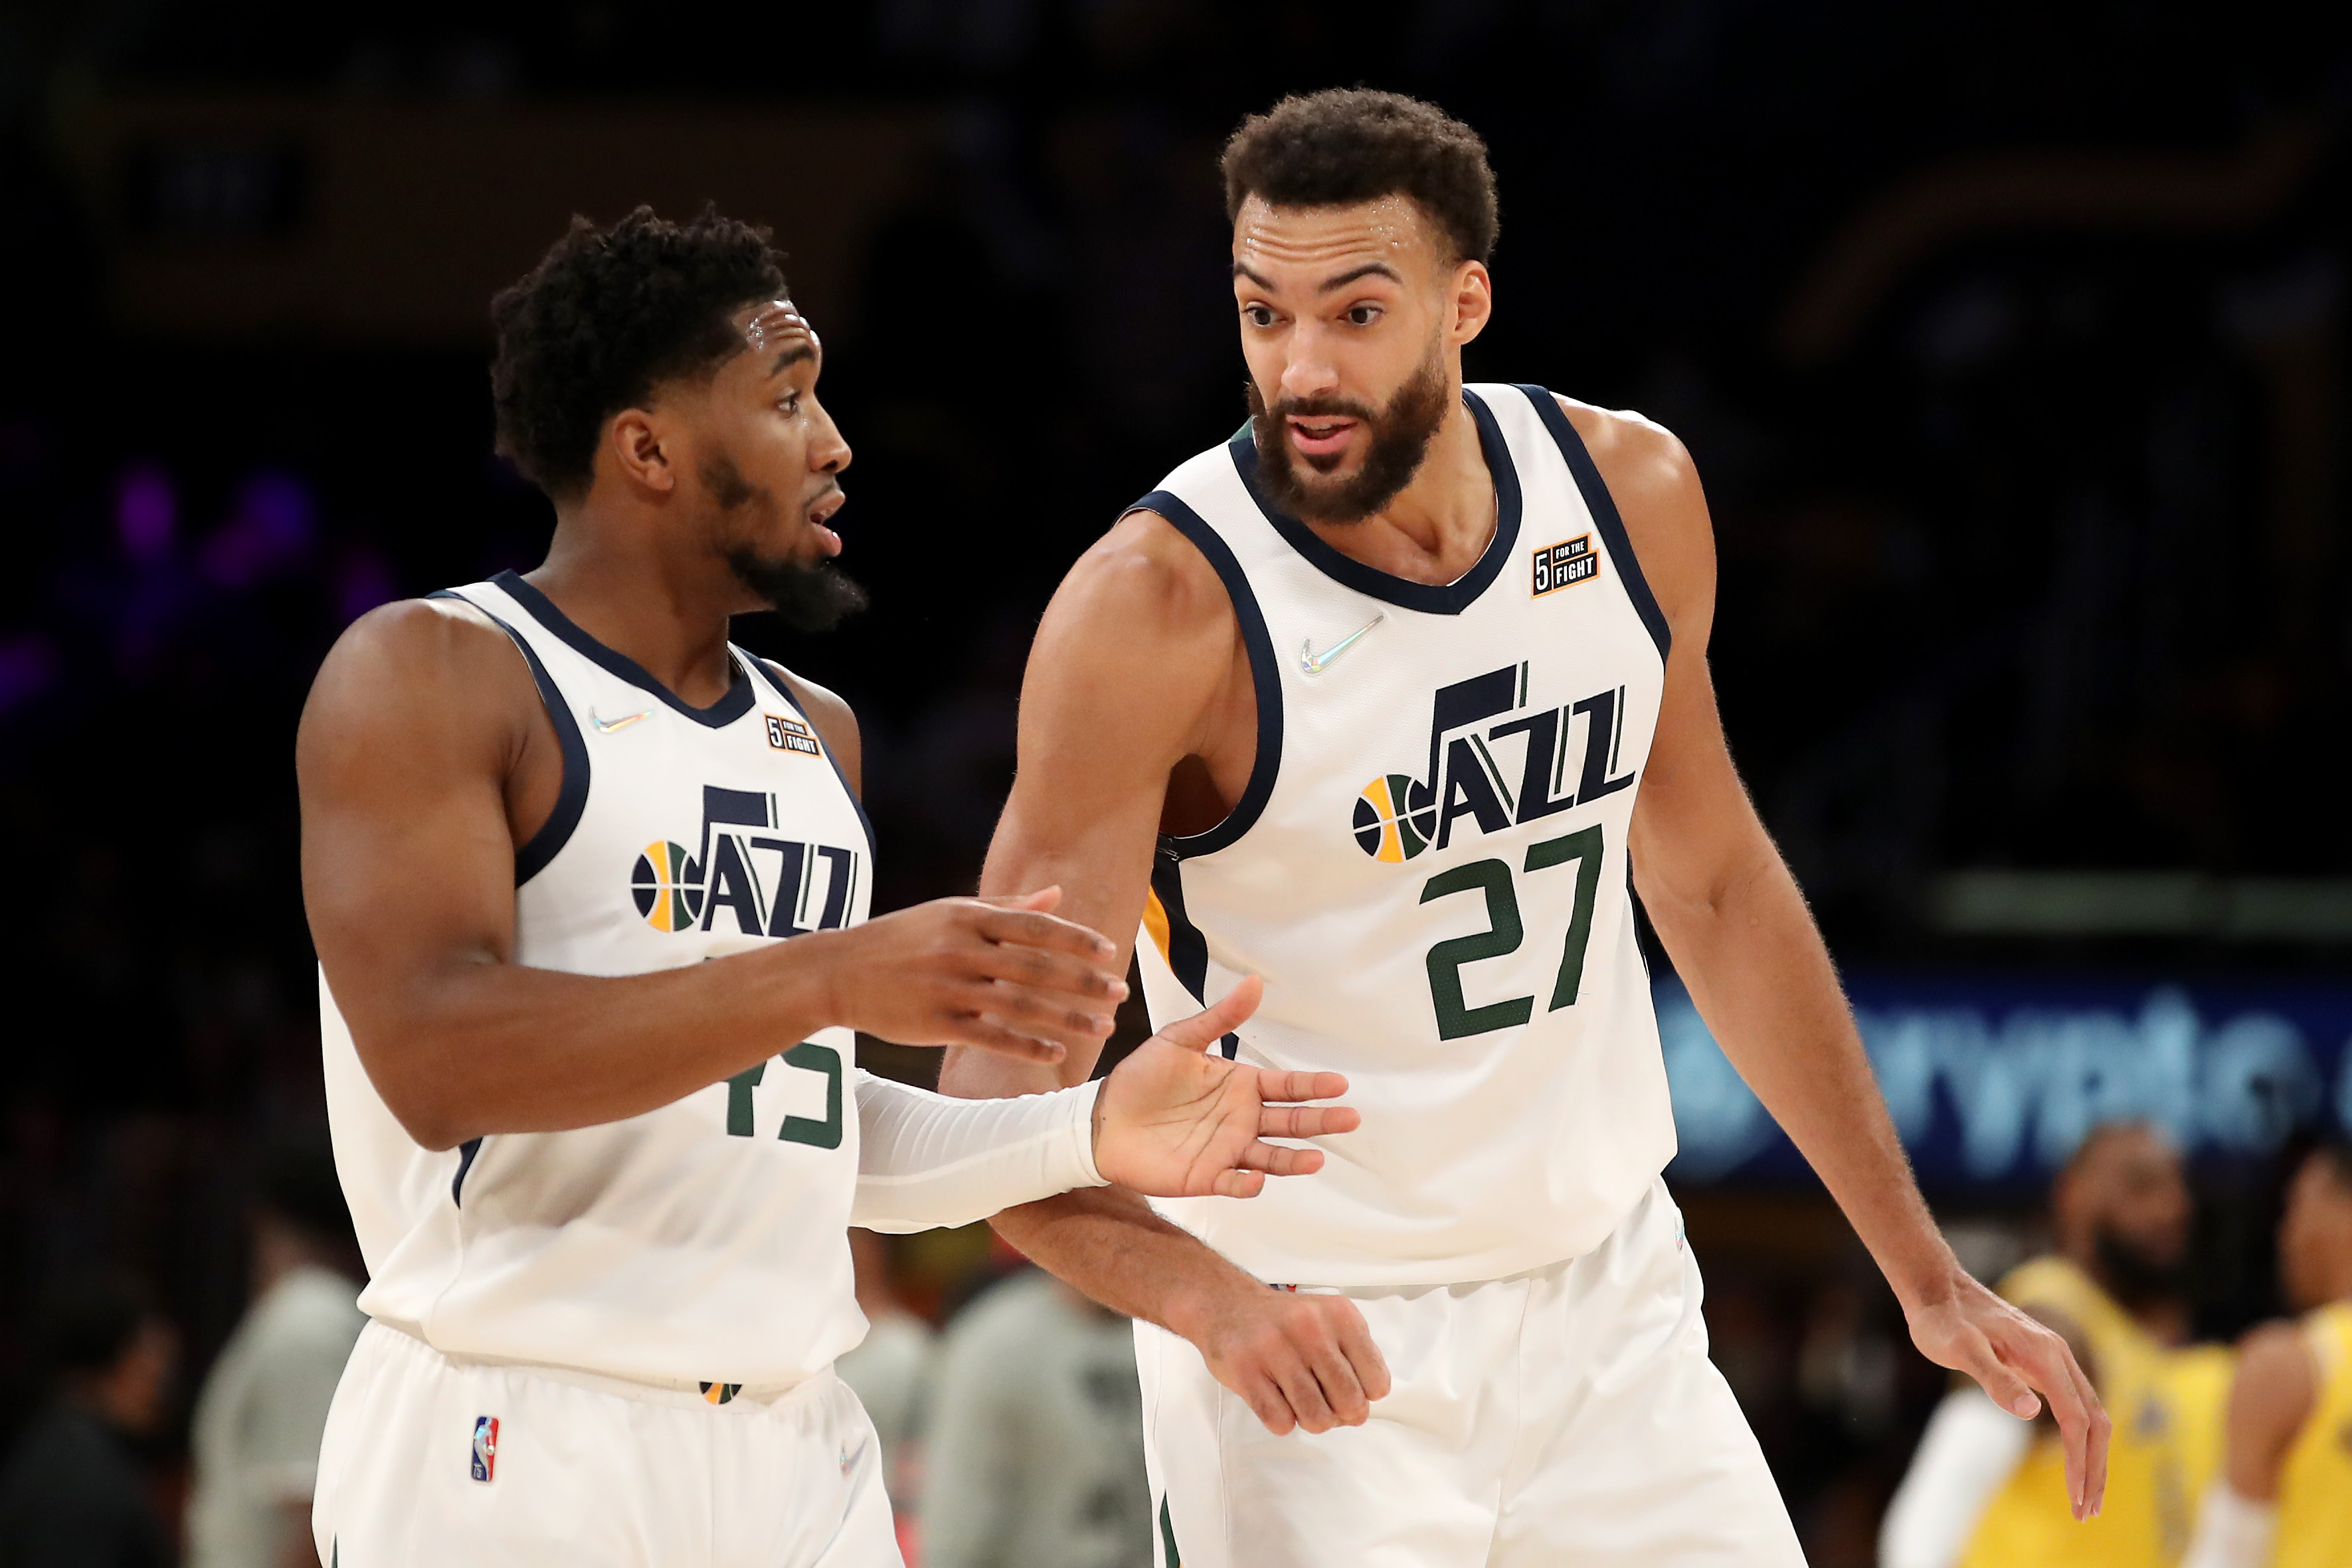 Rudy Gobert (ankle) returns for Jazz after missing 2 games